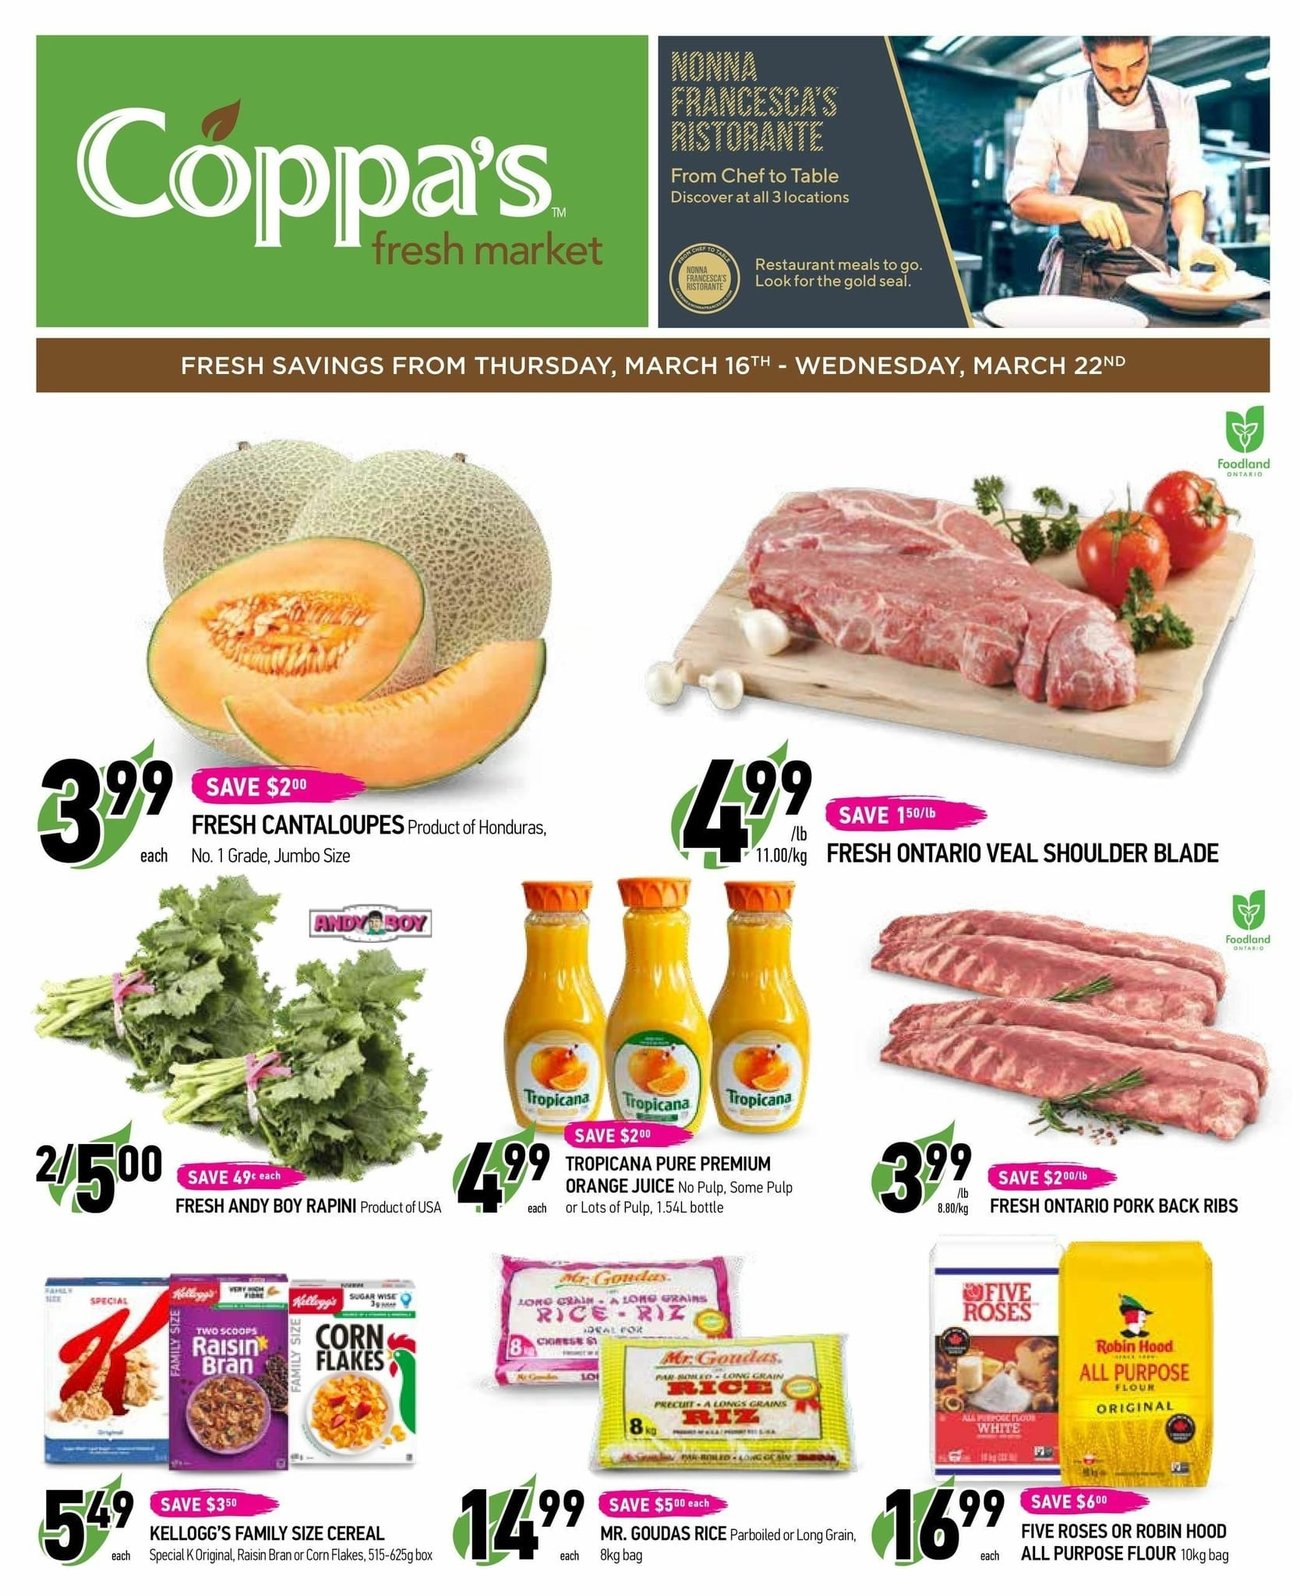 Coppa's Fresh Market - Weekly Flyer Specials - Page 1